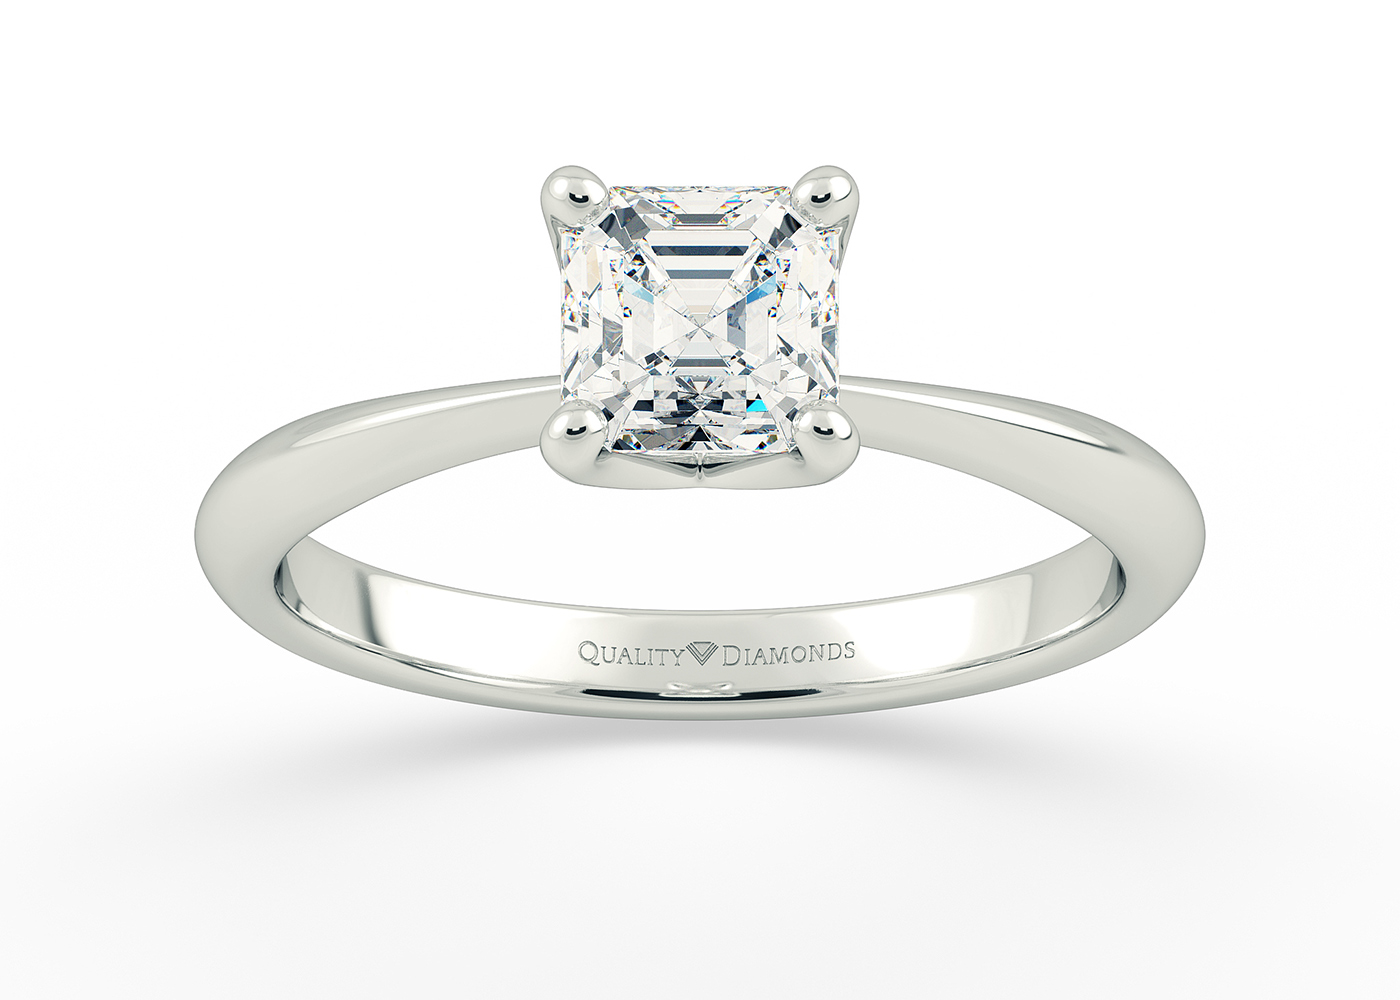 One Carat Asscher Solitaire Diamond Engagement Ring in 9K White Gold